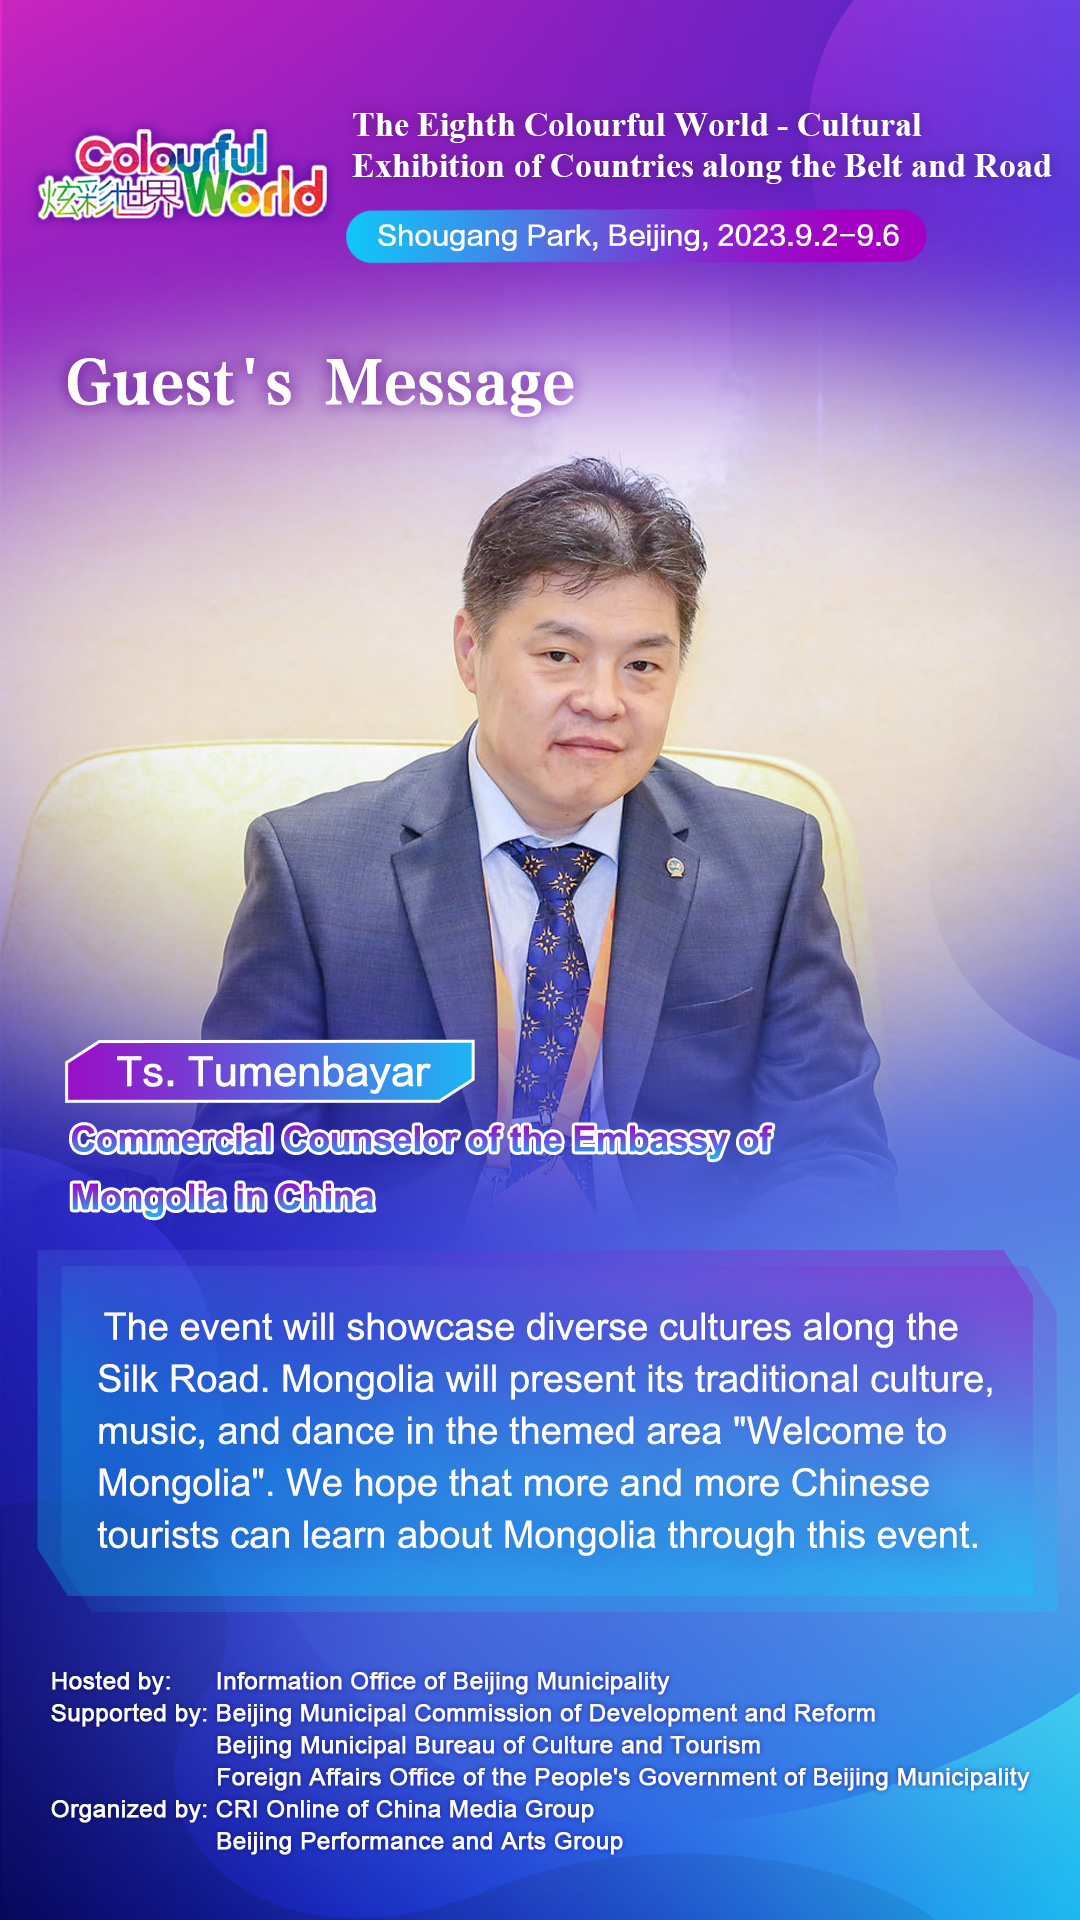 Guest’s Message - Ts. Tumenbayar, Commercial Counselor of the Embassy of Mongolia in China_fororder_第八届“炫彩世界”-金句海报-English-蒙古(1)